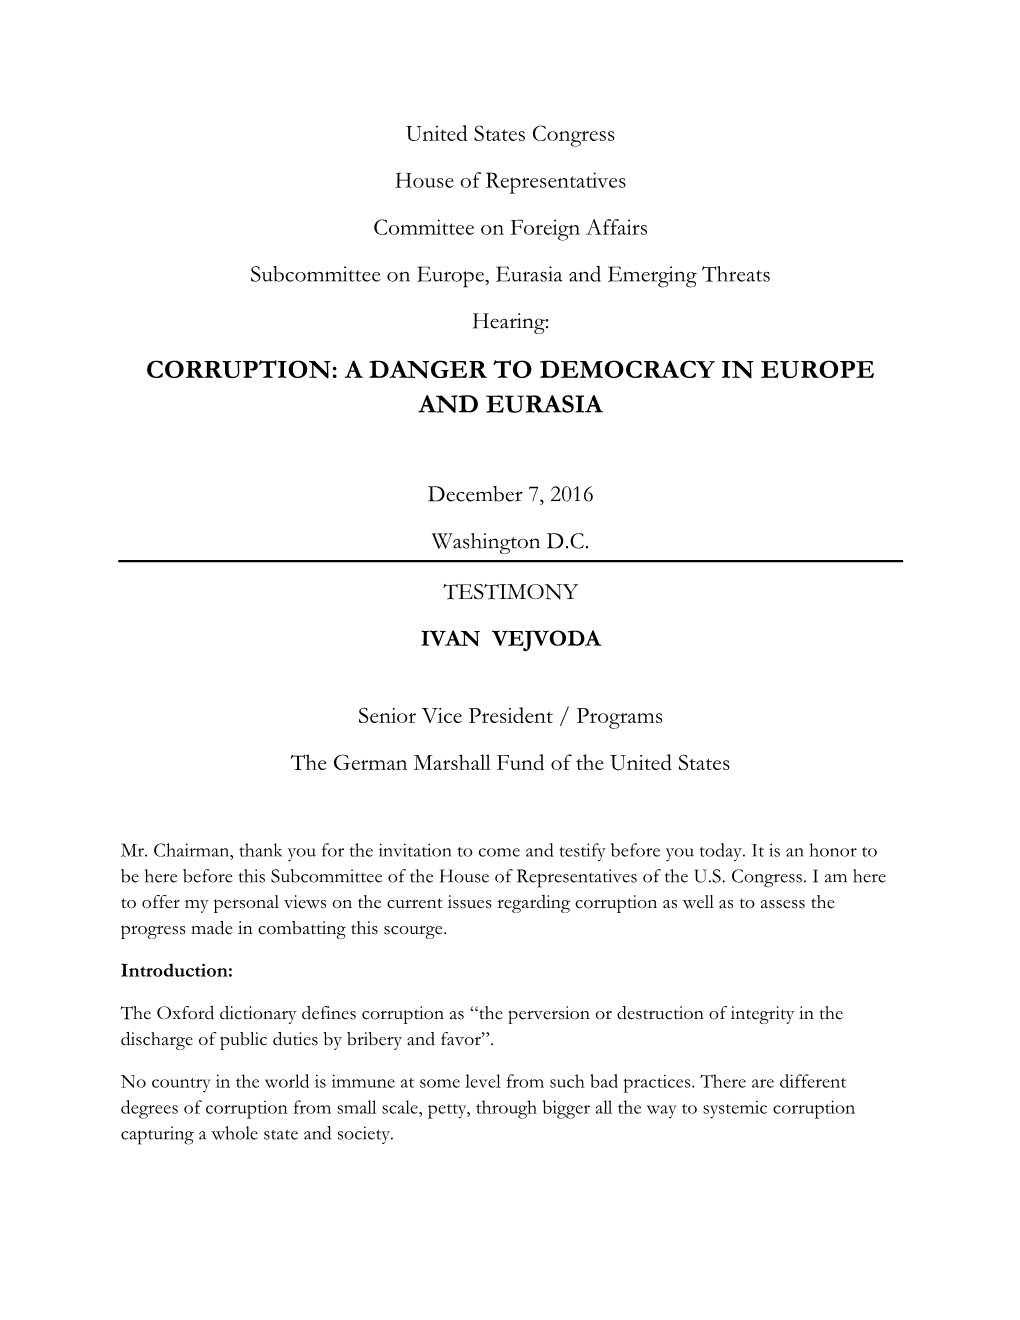 Corruption: a Danger to Democracy in Europe and Eurasia